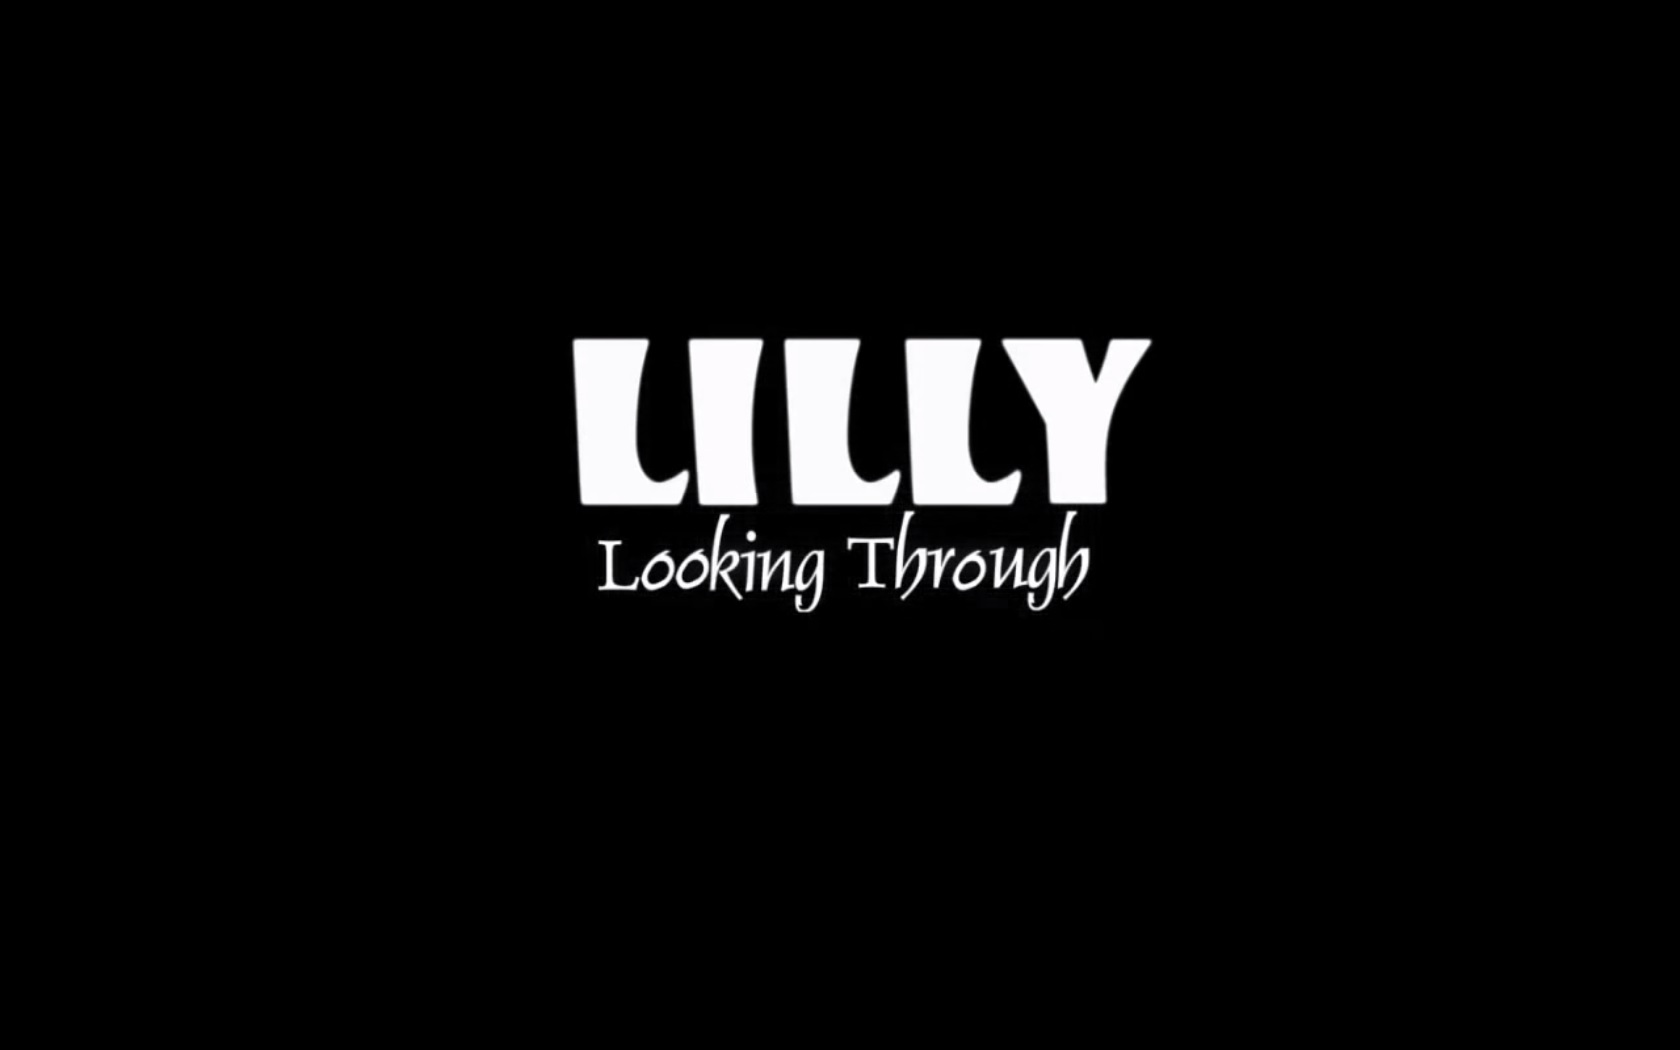 Lilly Looking Through: Charming, if a Tad Confused. – The Refined Geek